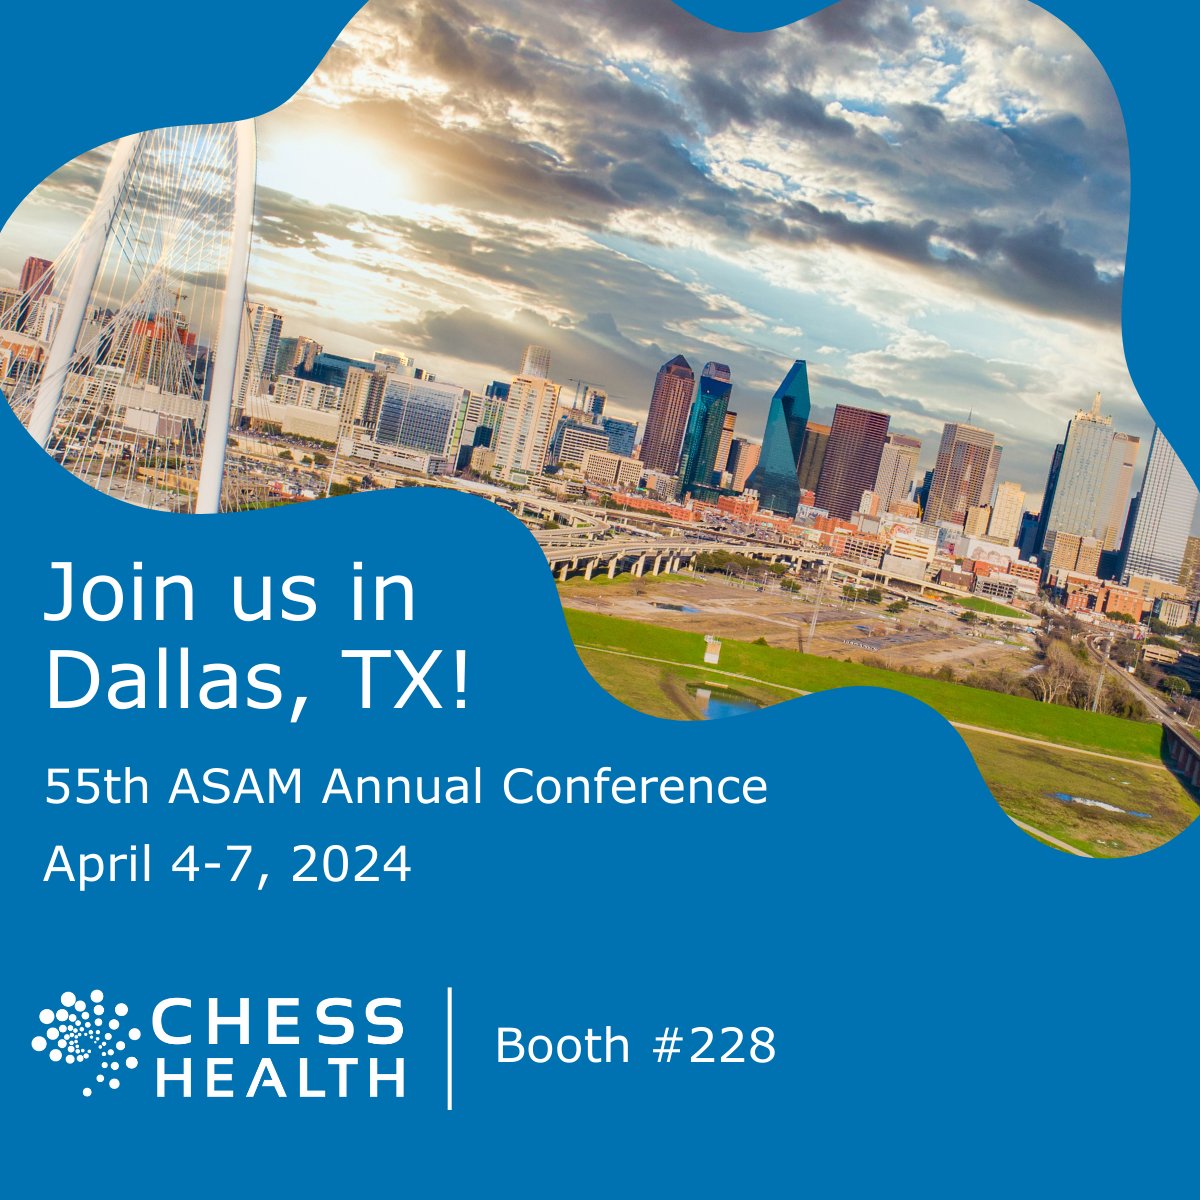 We're spending the rest of our week in Dallas, TX at the 55th ASAM Annual Conference! Come by and see what's new at #CHESSHealth (Booth 228). #ASAM2024